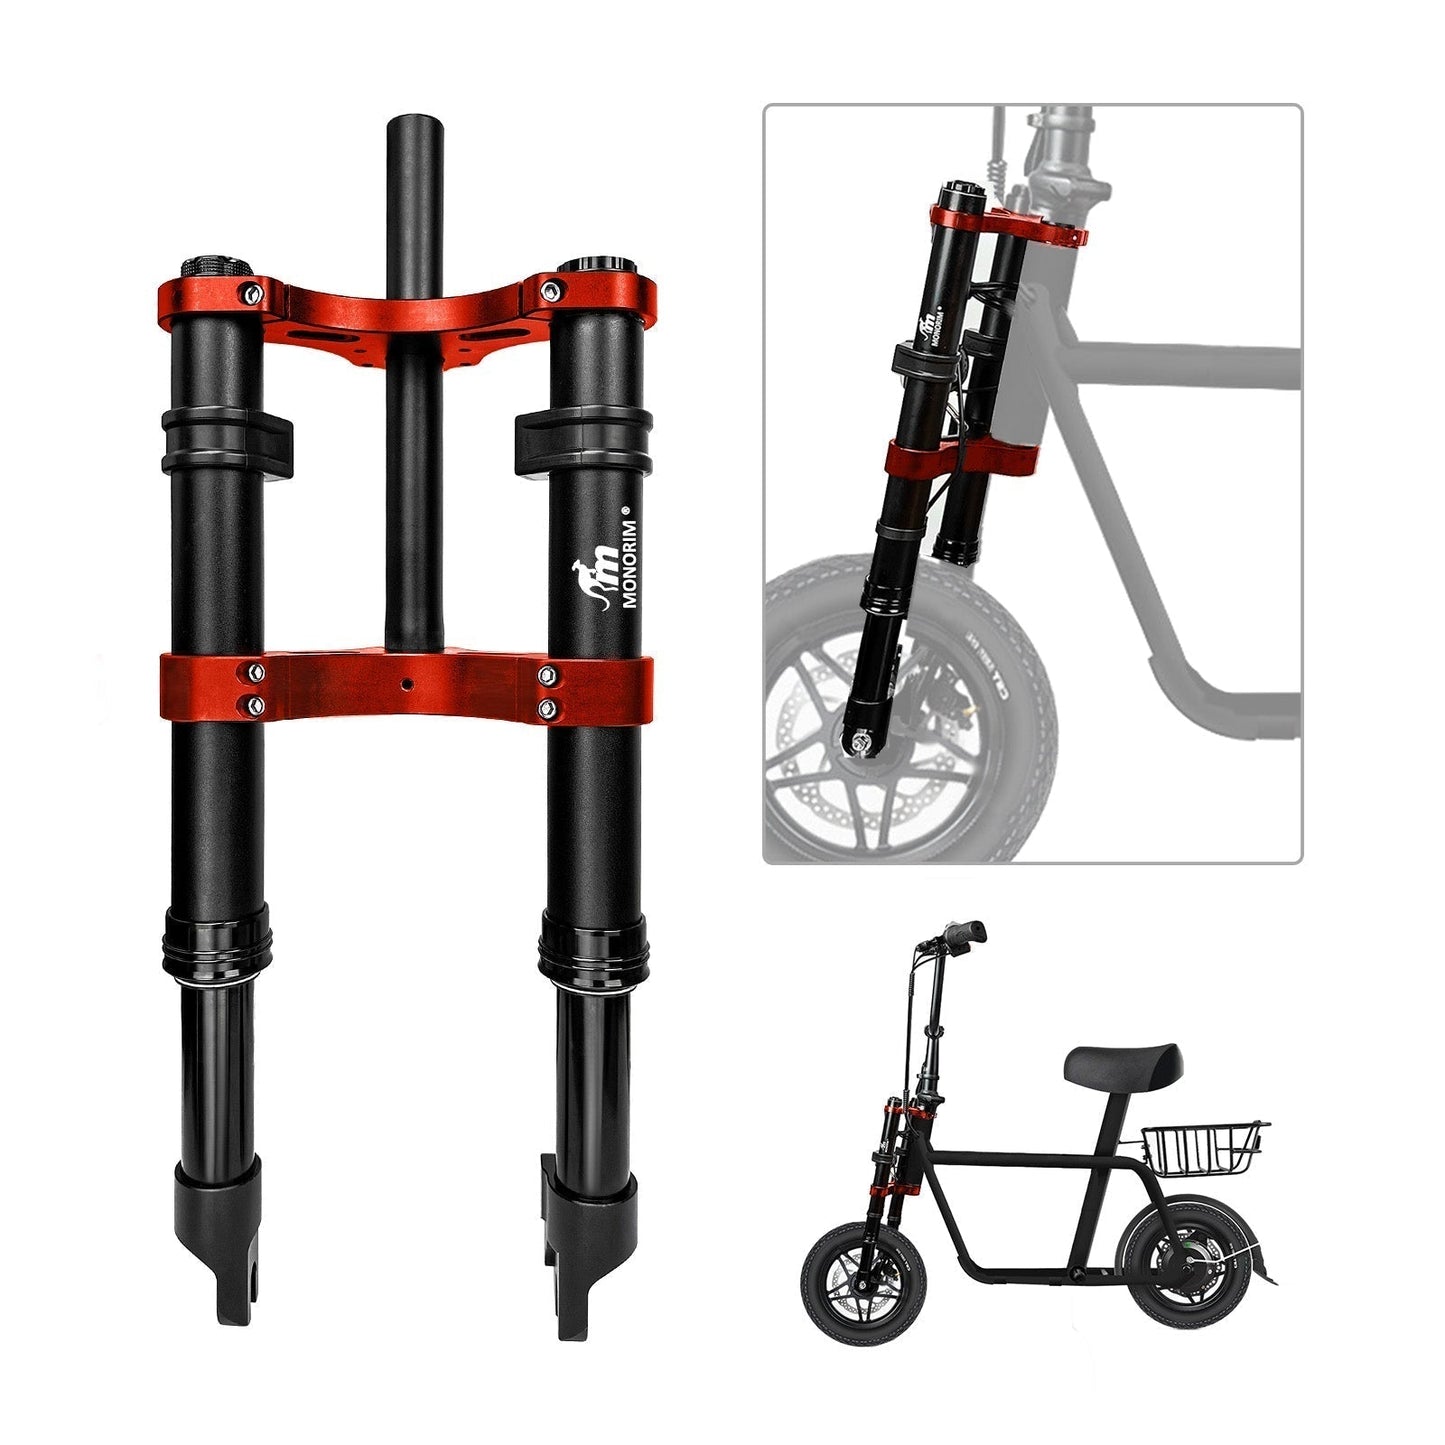 Monorim MB0-12inch front air suspension modify great kit to be more safety and comfort for Fiido Q1s ebike